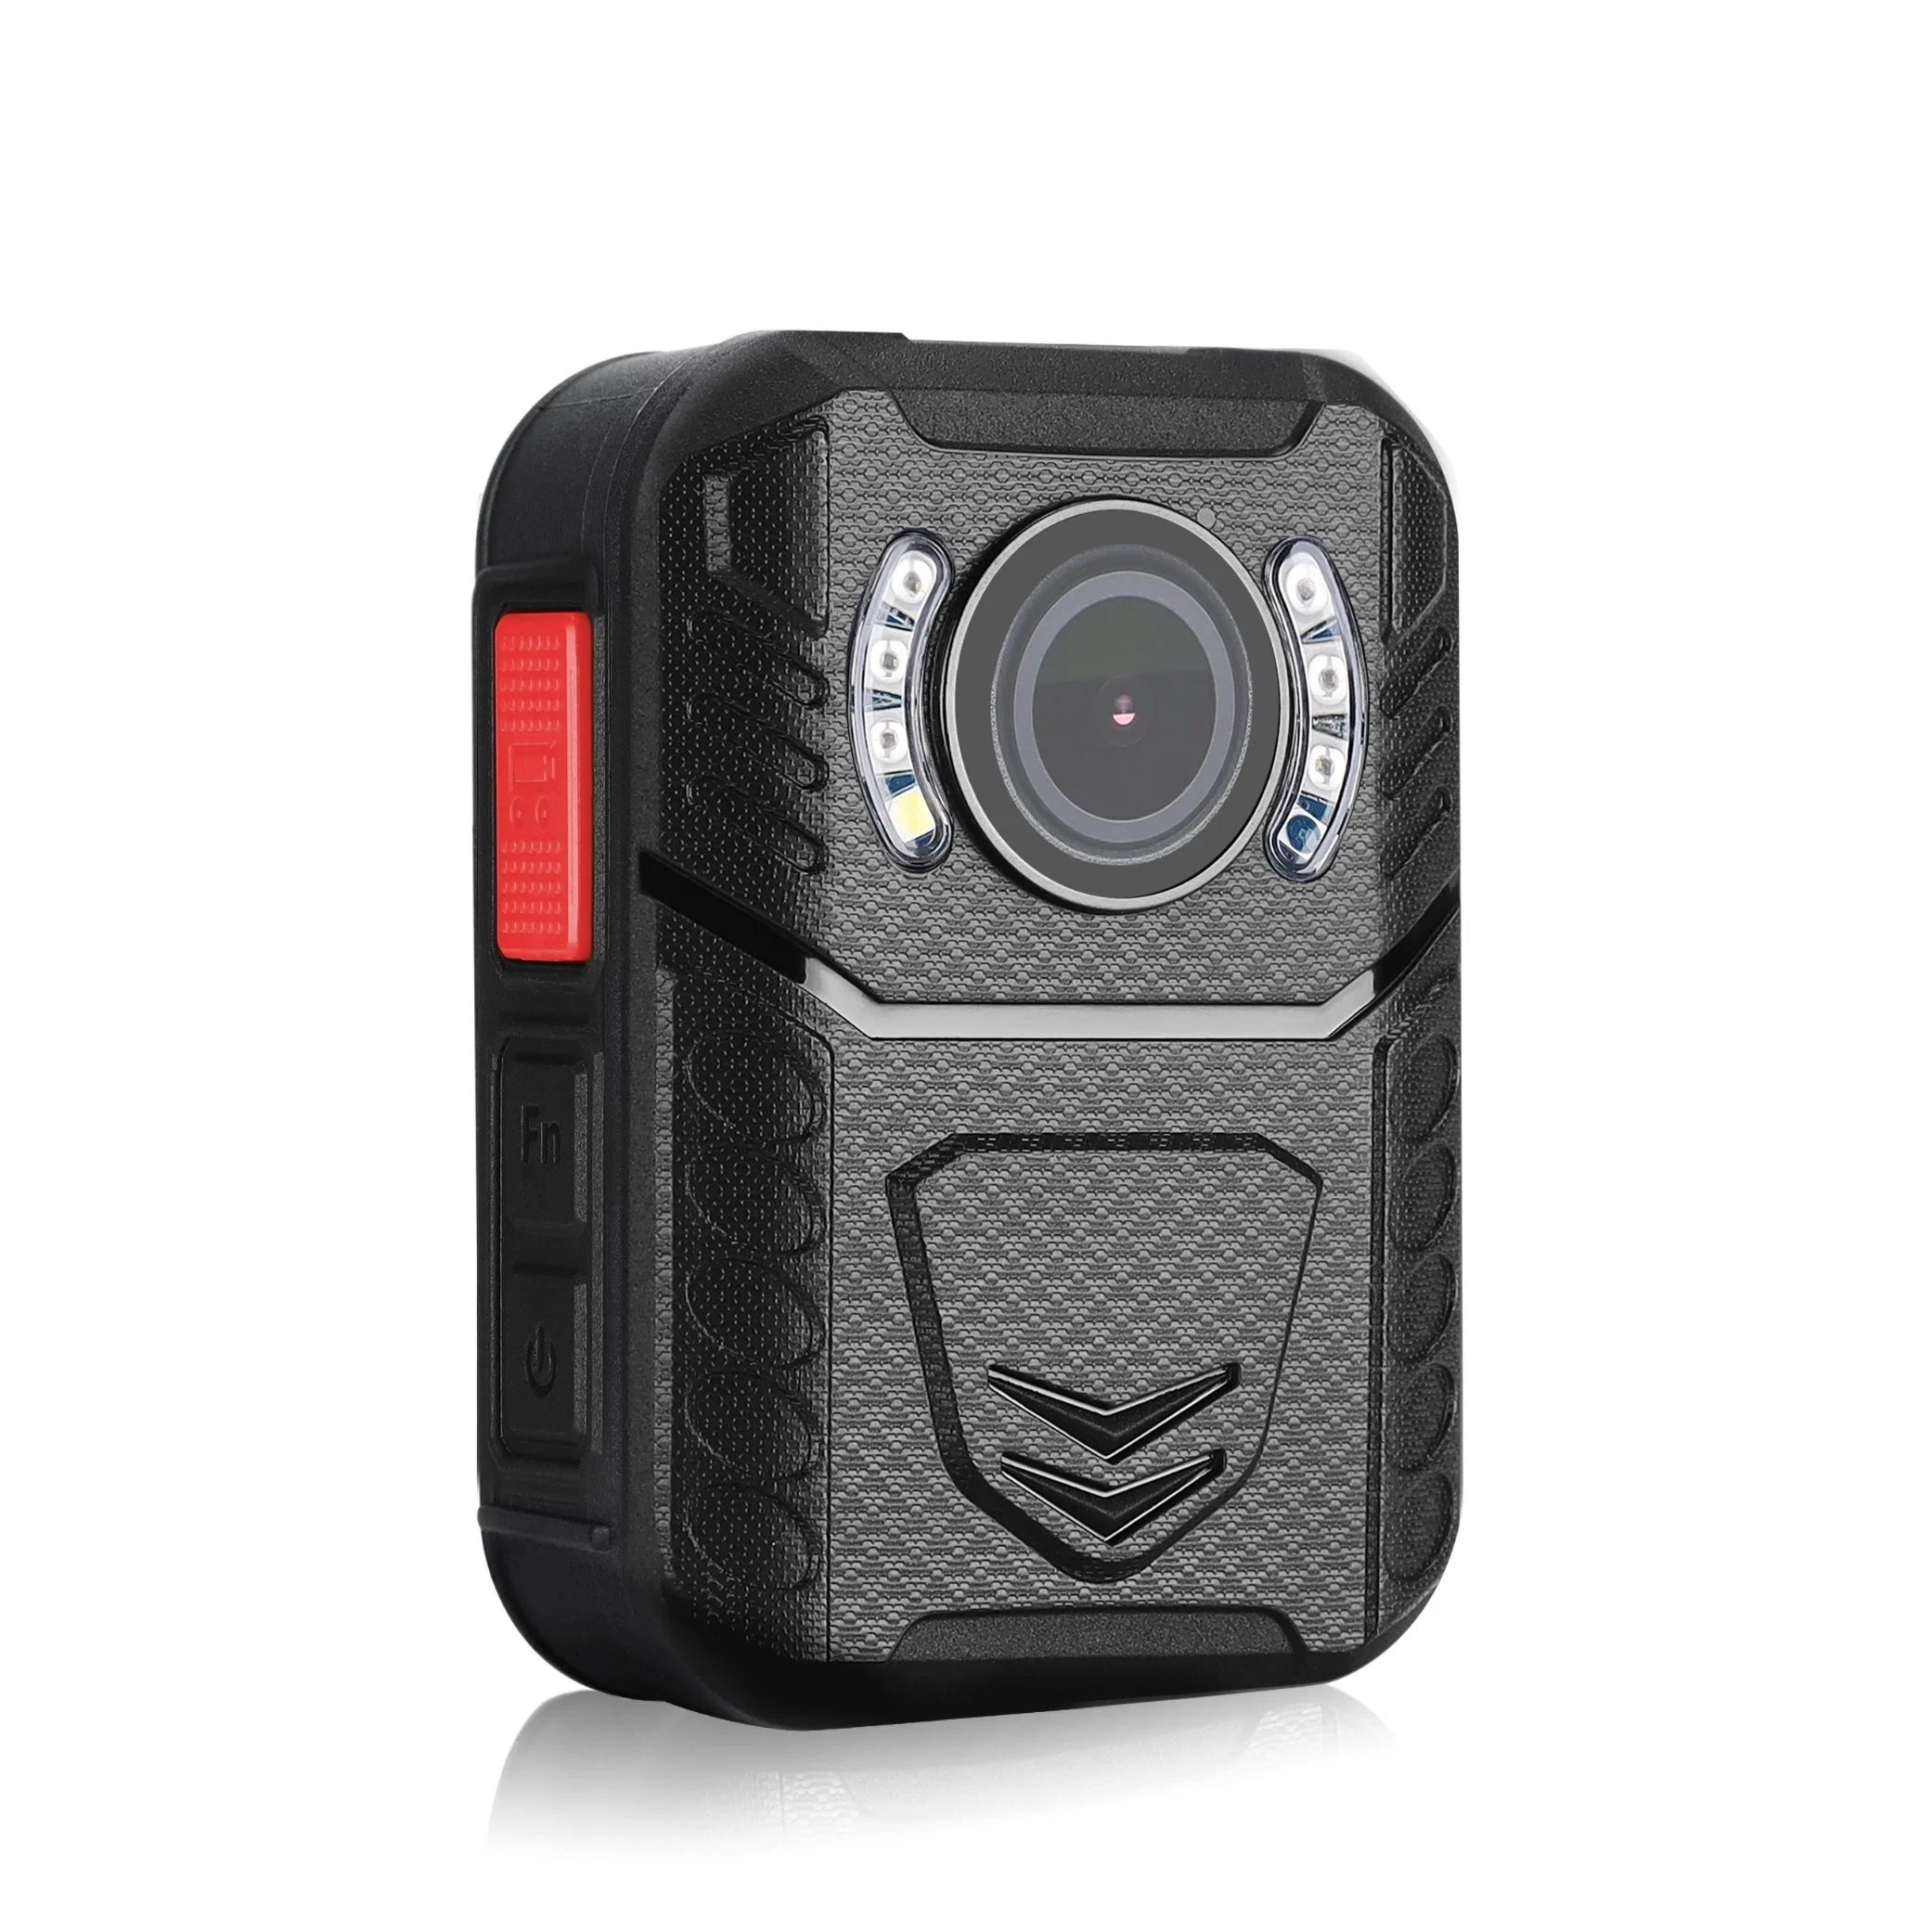 Waterproof IP68 Body Worn Camera, IR Nitht Vision, Motion Dettection, Drop Resistance, USB Cable, Rotatable Crocodile Clip, Ambarella H22 Chip